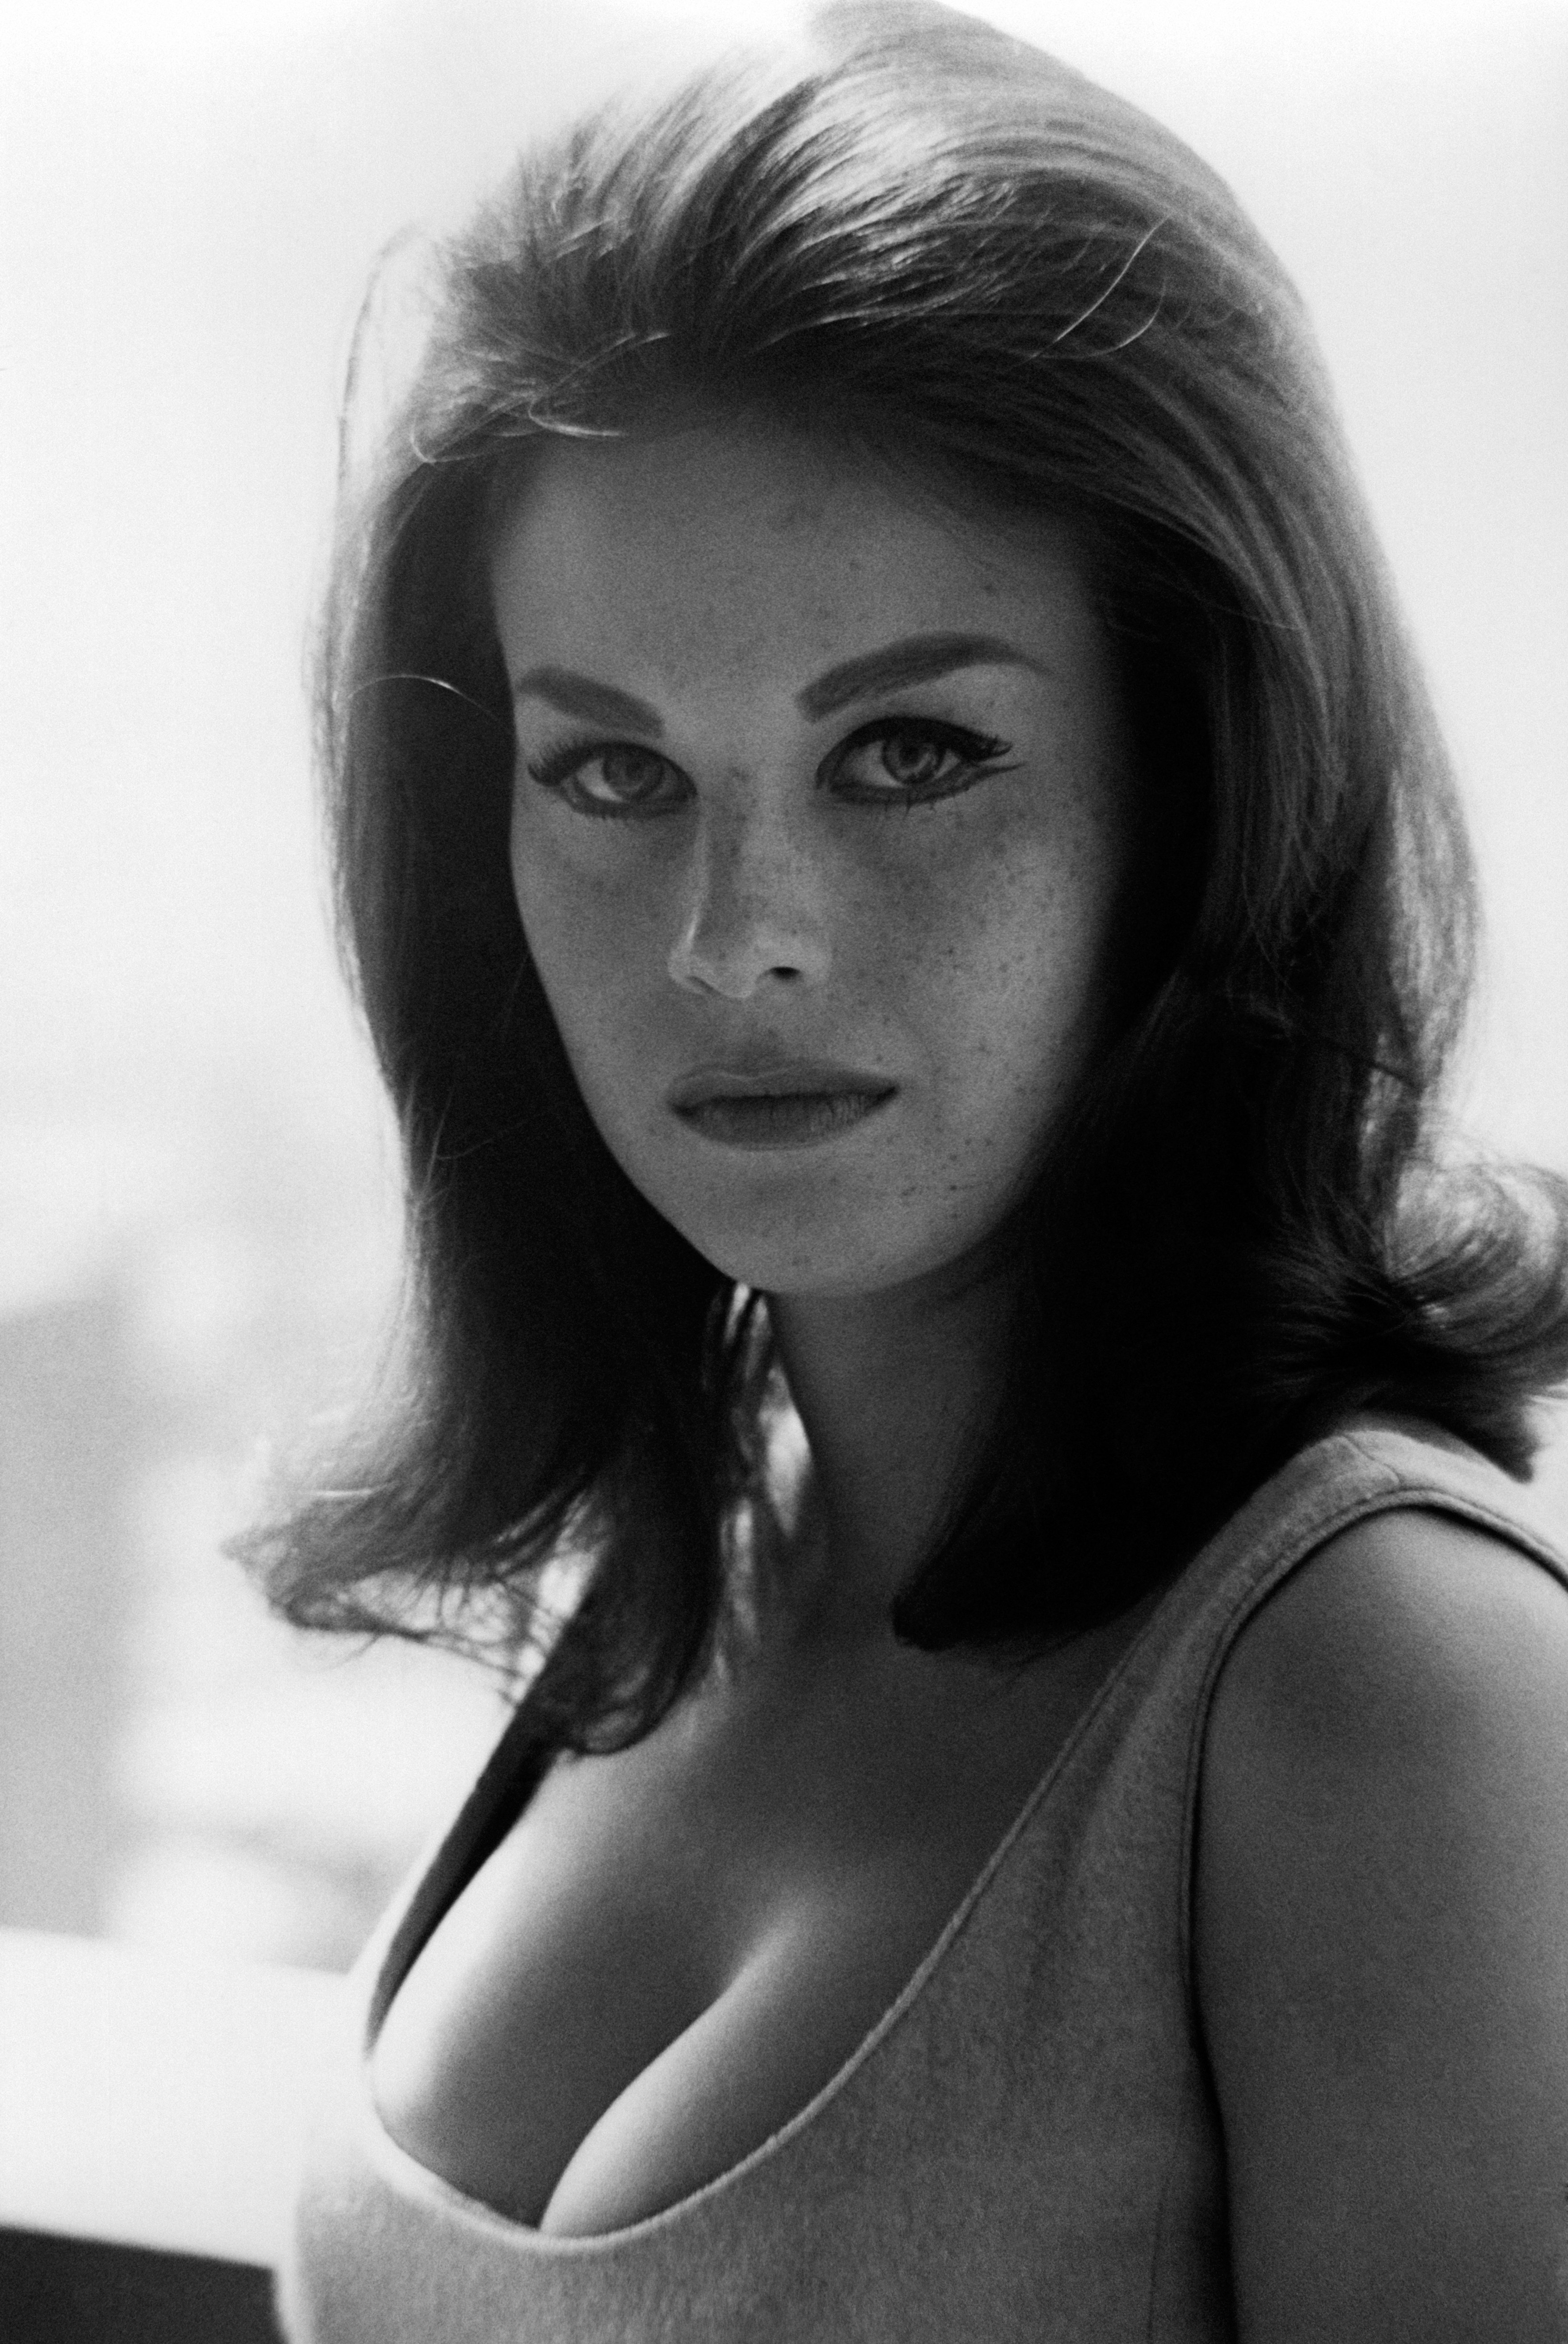 A black and white portrait of former child actress Lana Wood in 1966 in the United States |  Source: Getty Images